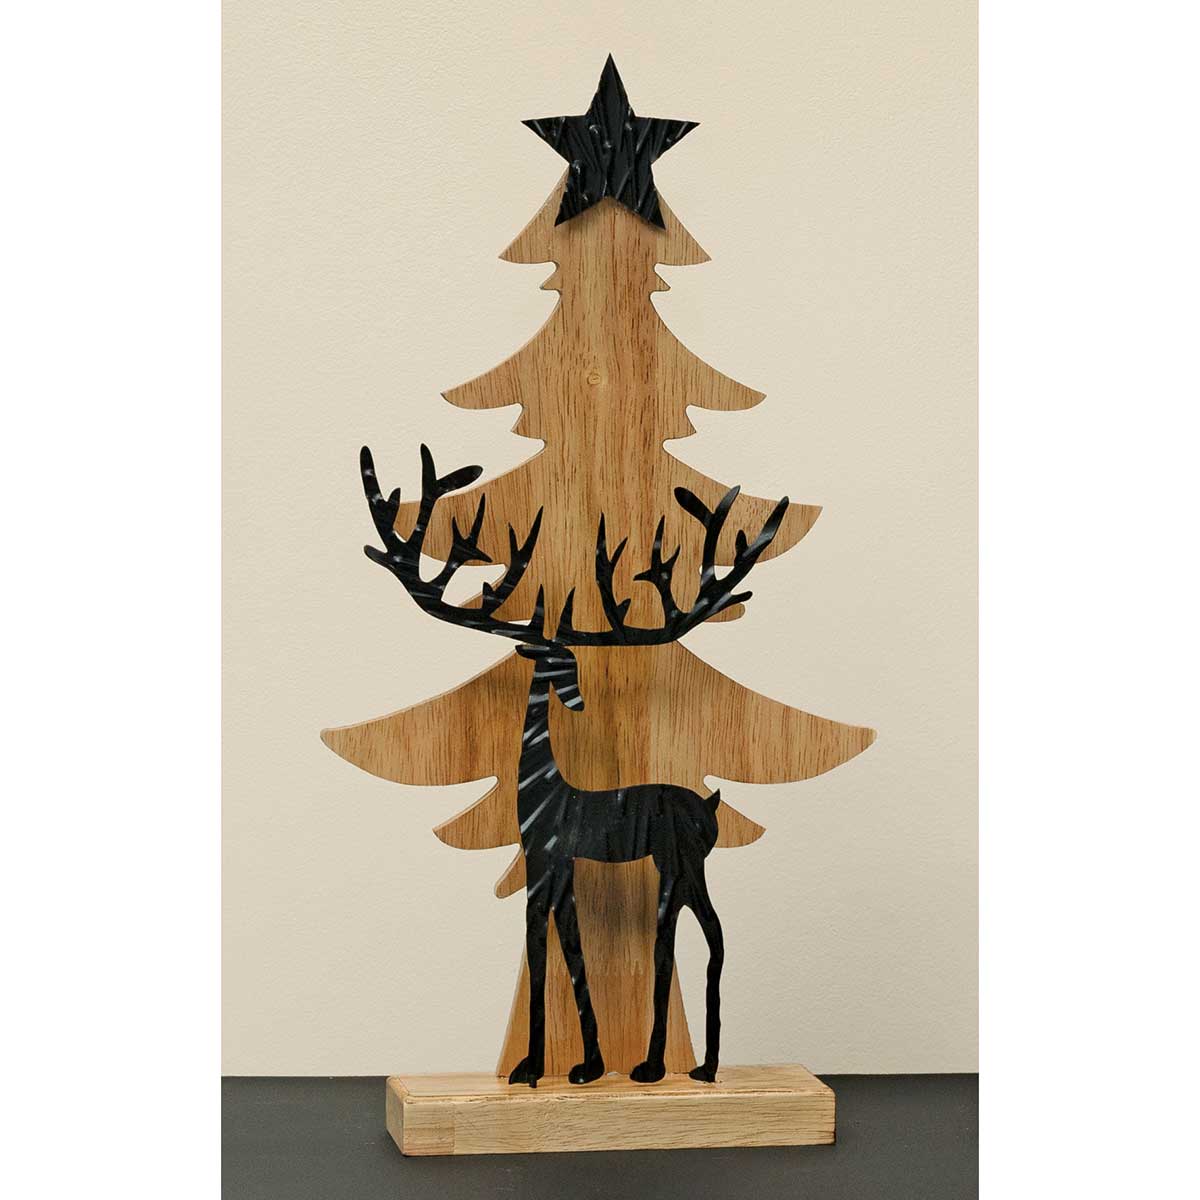 METAL DEER AND WOOD TREE ON BASE BLACK/NATURAL WITH STAR